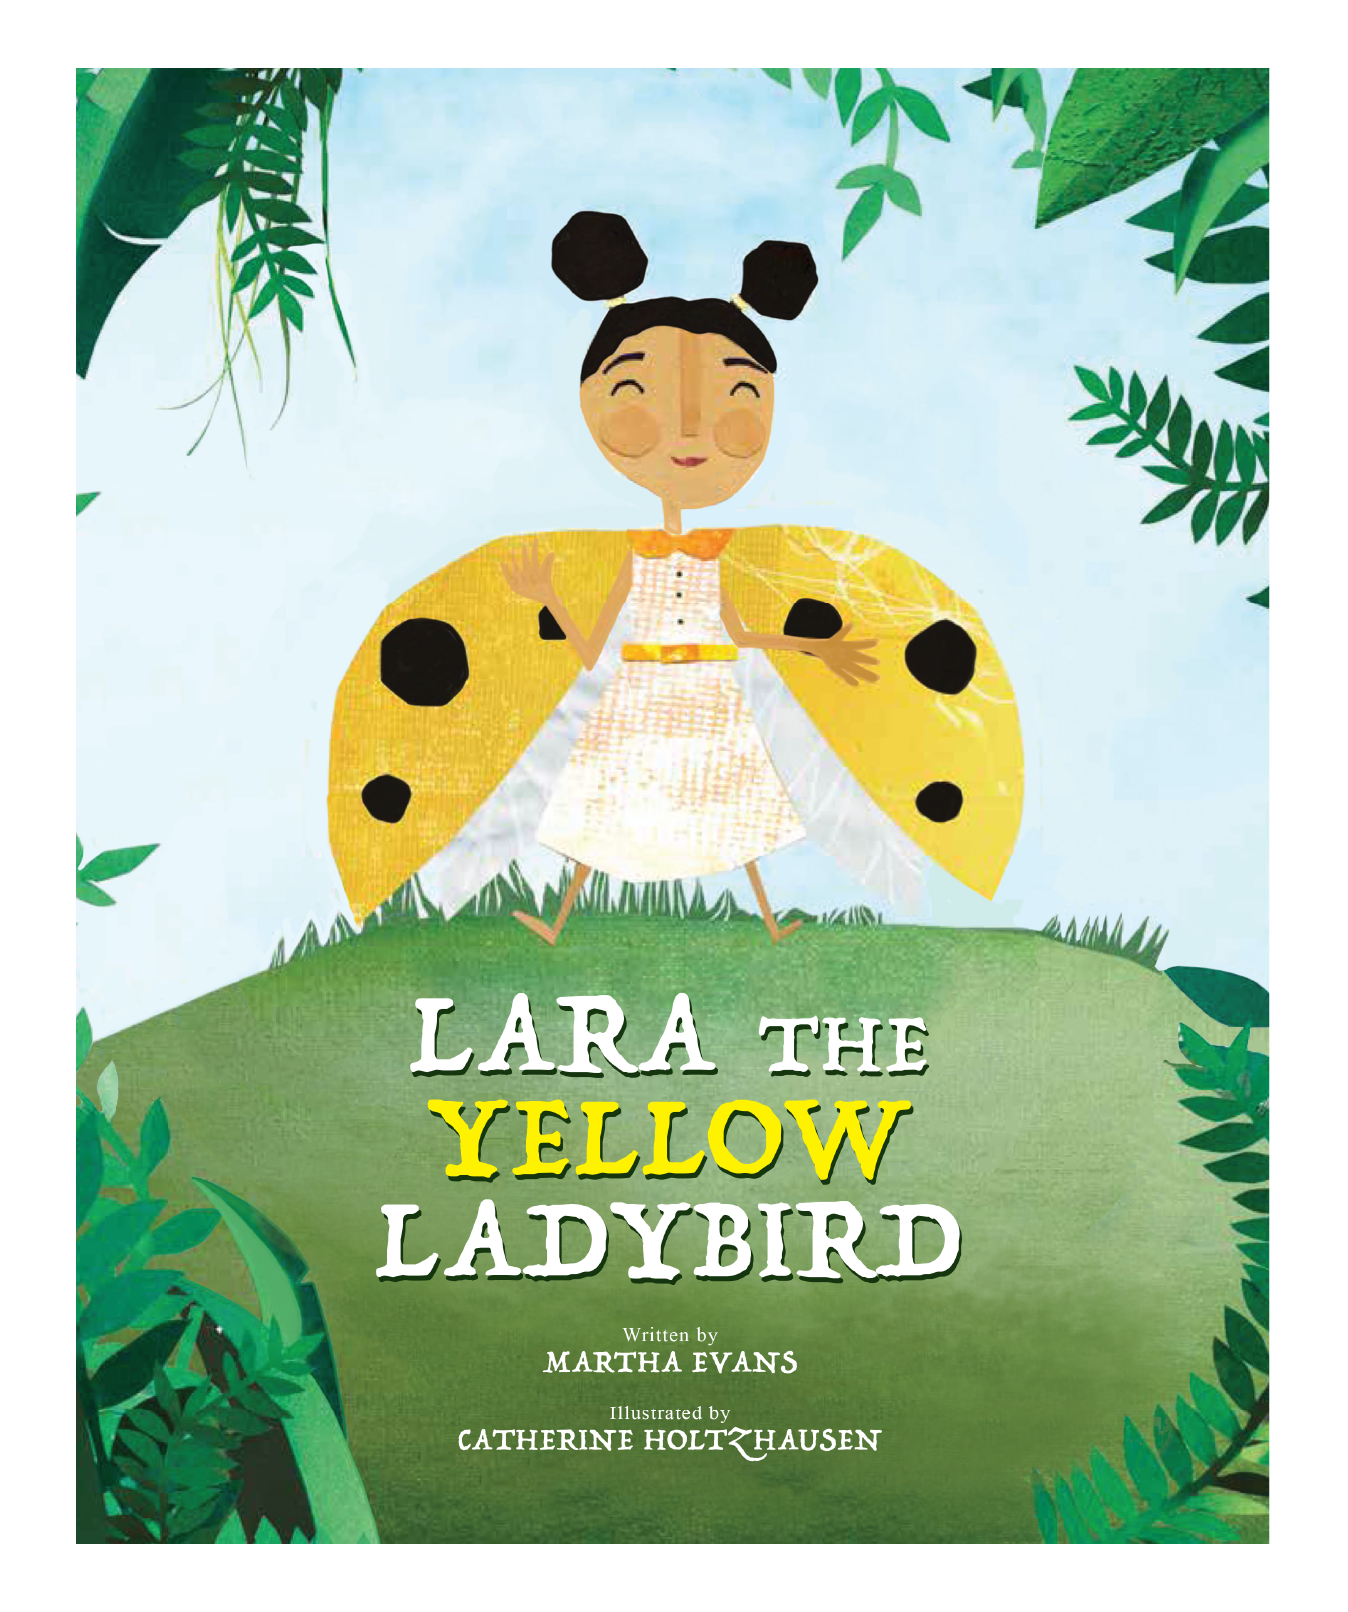 Lara the yellow ladybird - Think Equal book cover